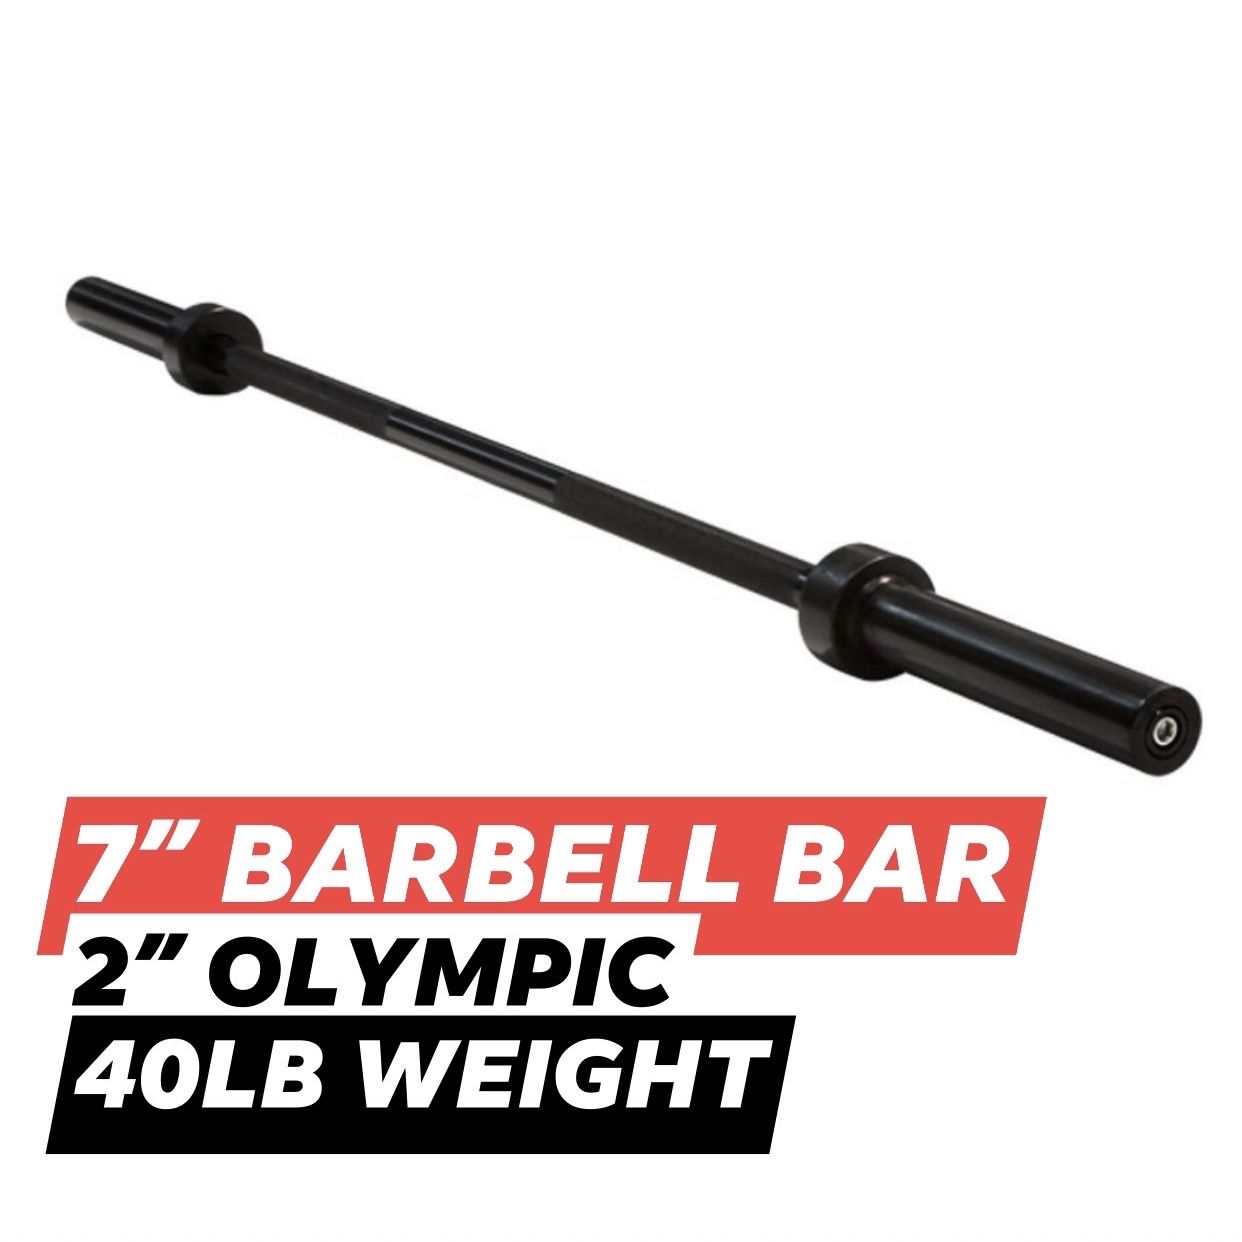 7FT OLYMPIC BARBELL BAR